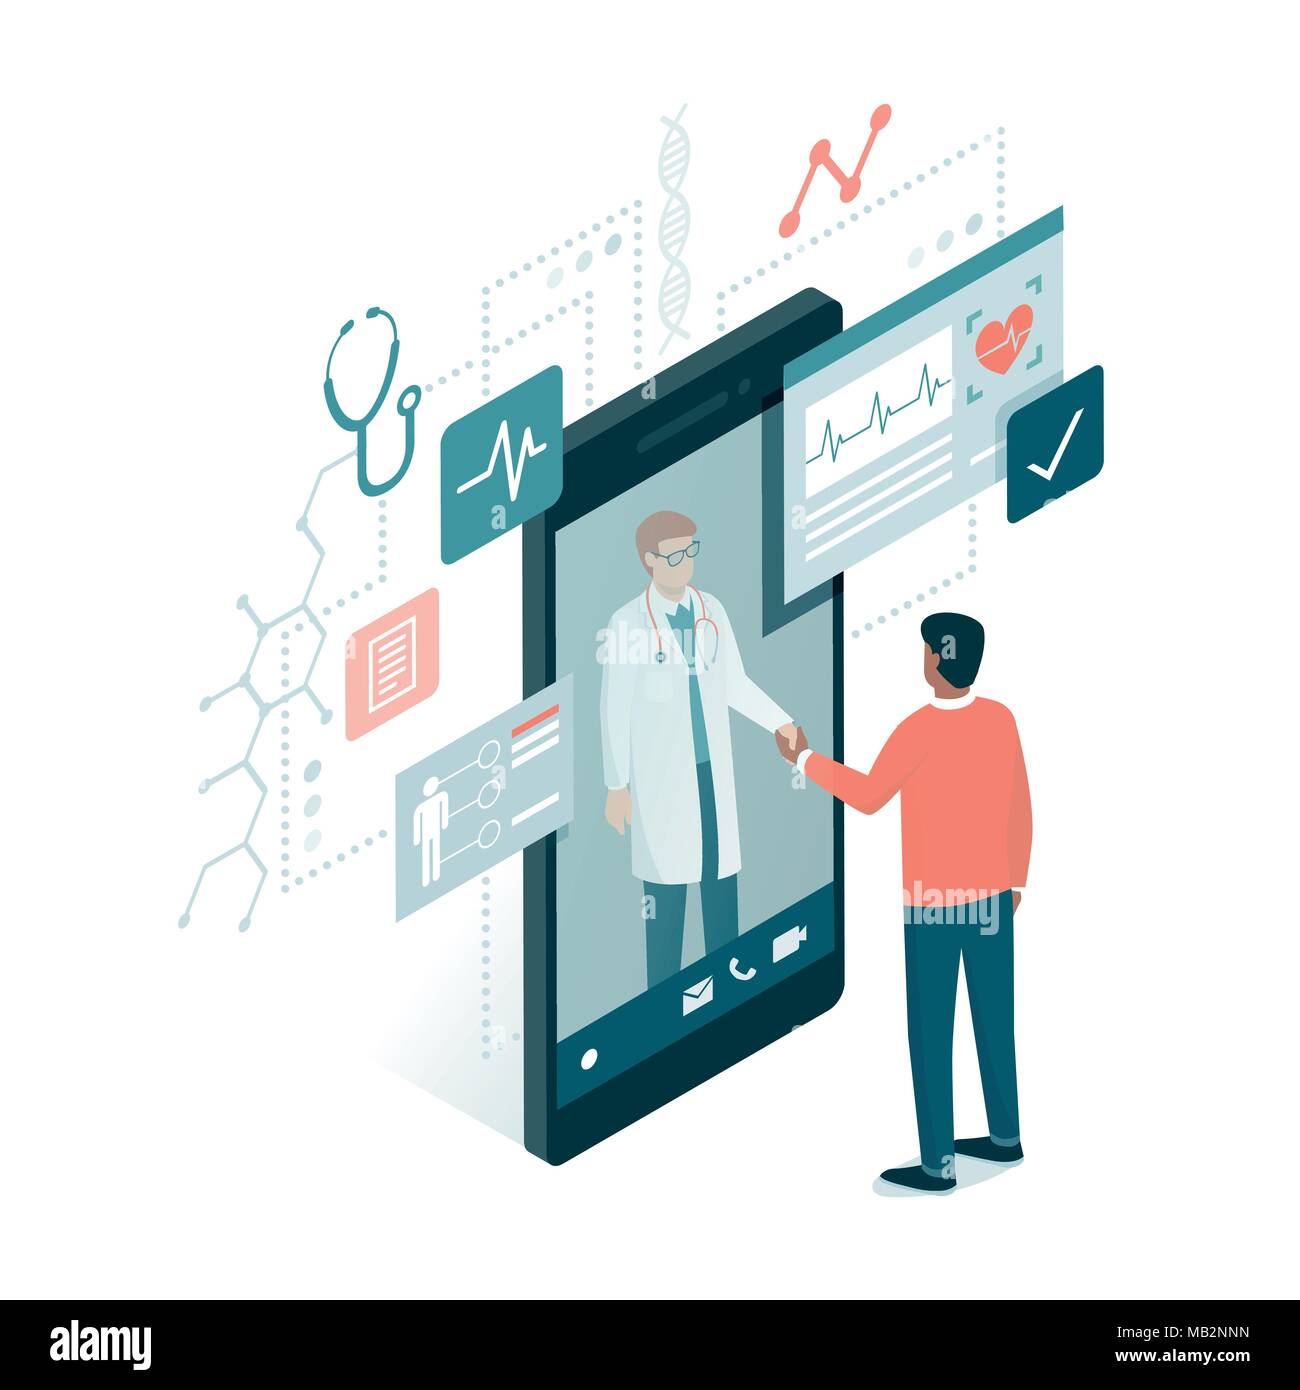 Patient meeting a professional doctor online on a smartphone and shaking hands, online medical consultation concept Stock Vector